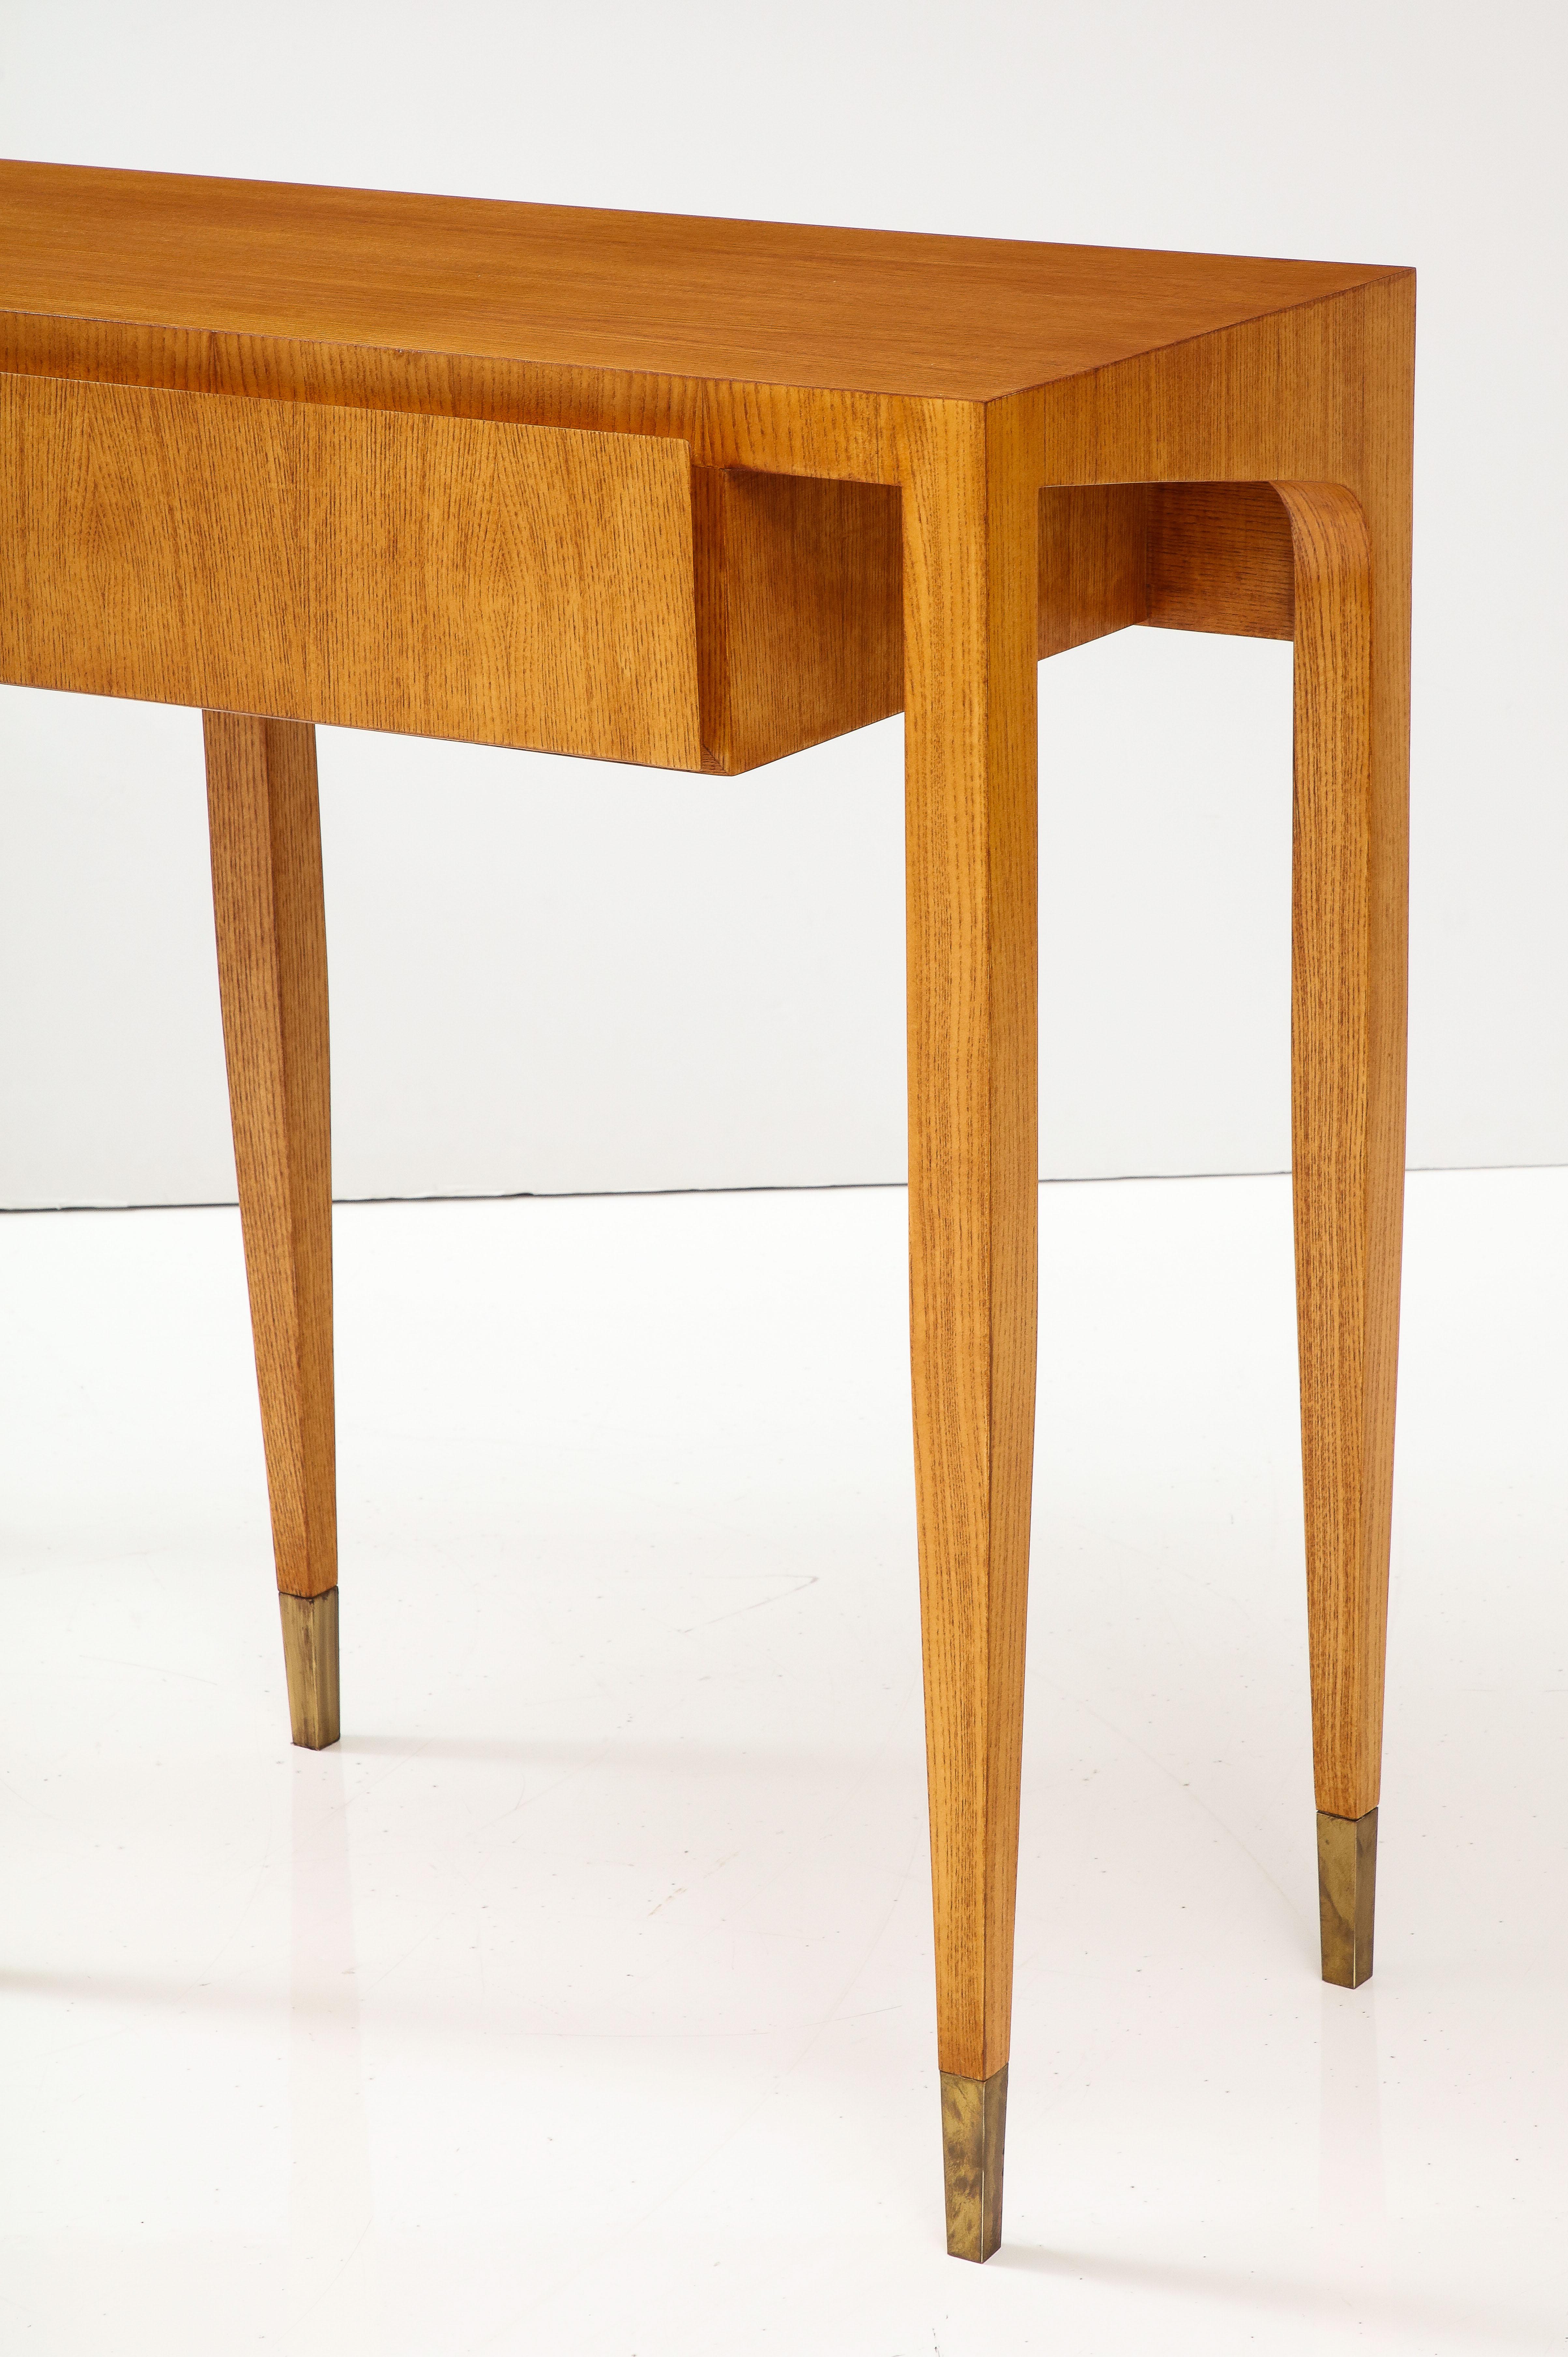 Gio Ponti for Giordano Chiesa Rare Pair of Ash Wood Consoles, Italy, 1950s For Sale 3